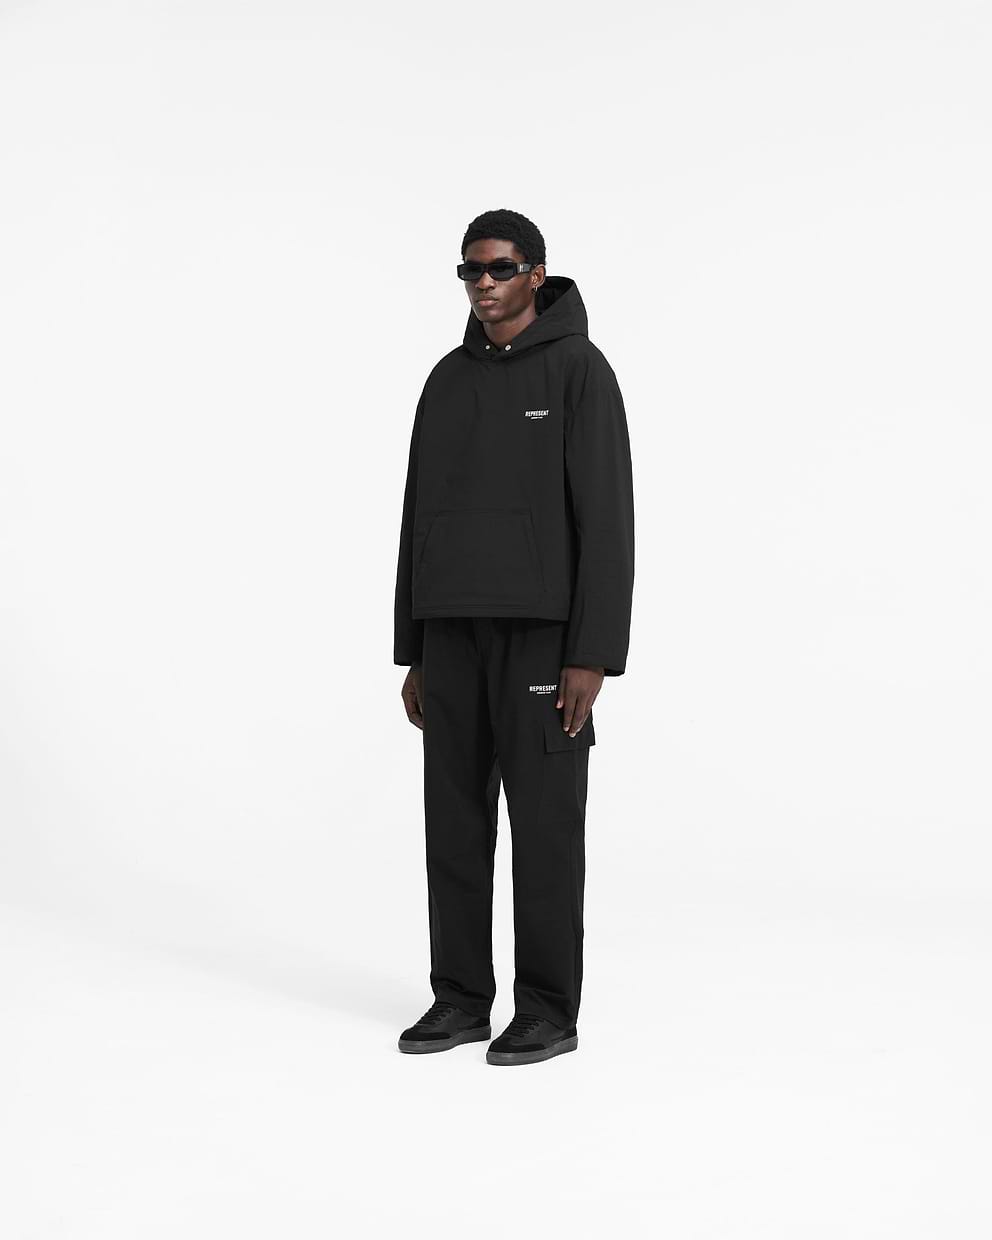 Represent Owners Club Hooded Pullover Jacket - Black